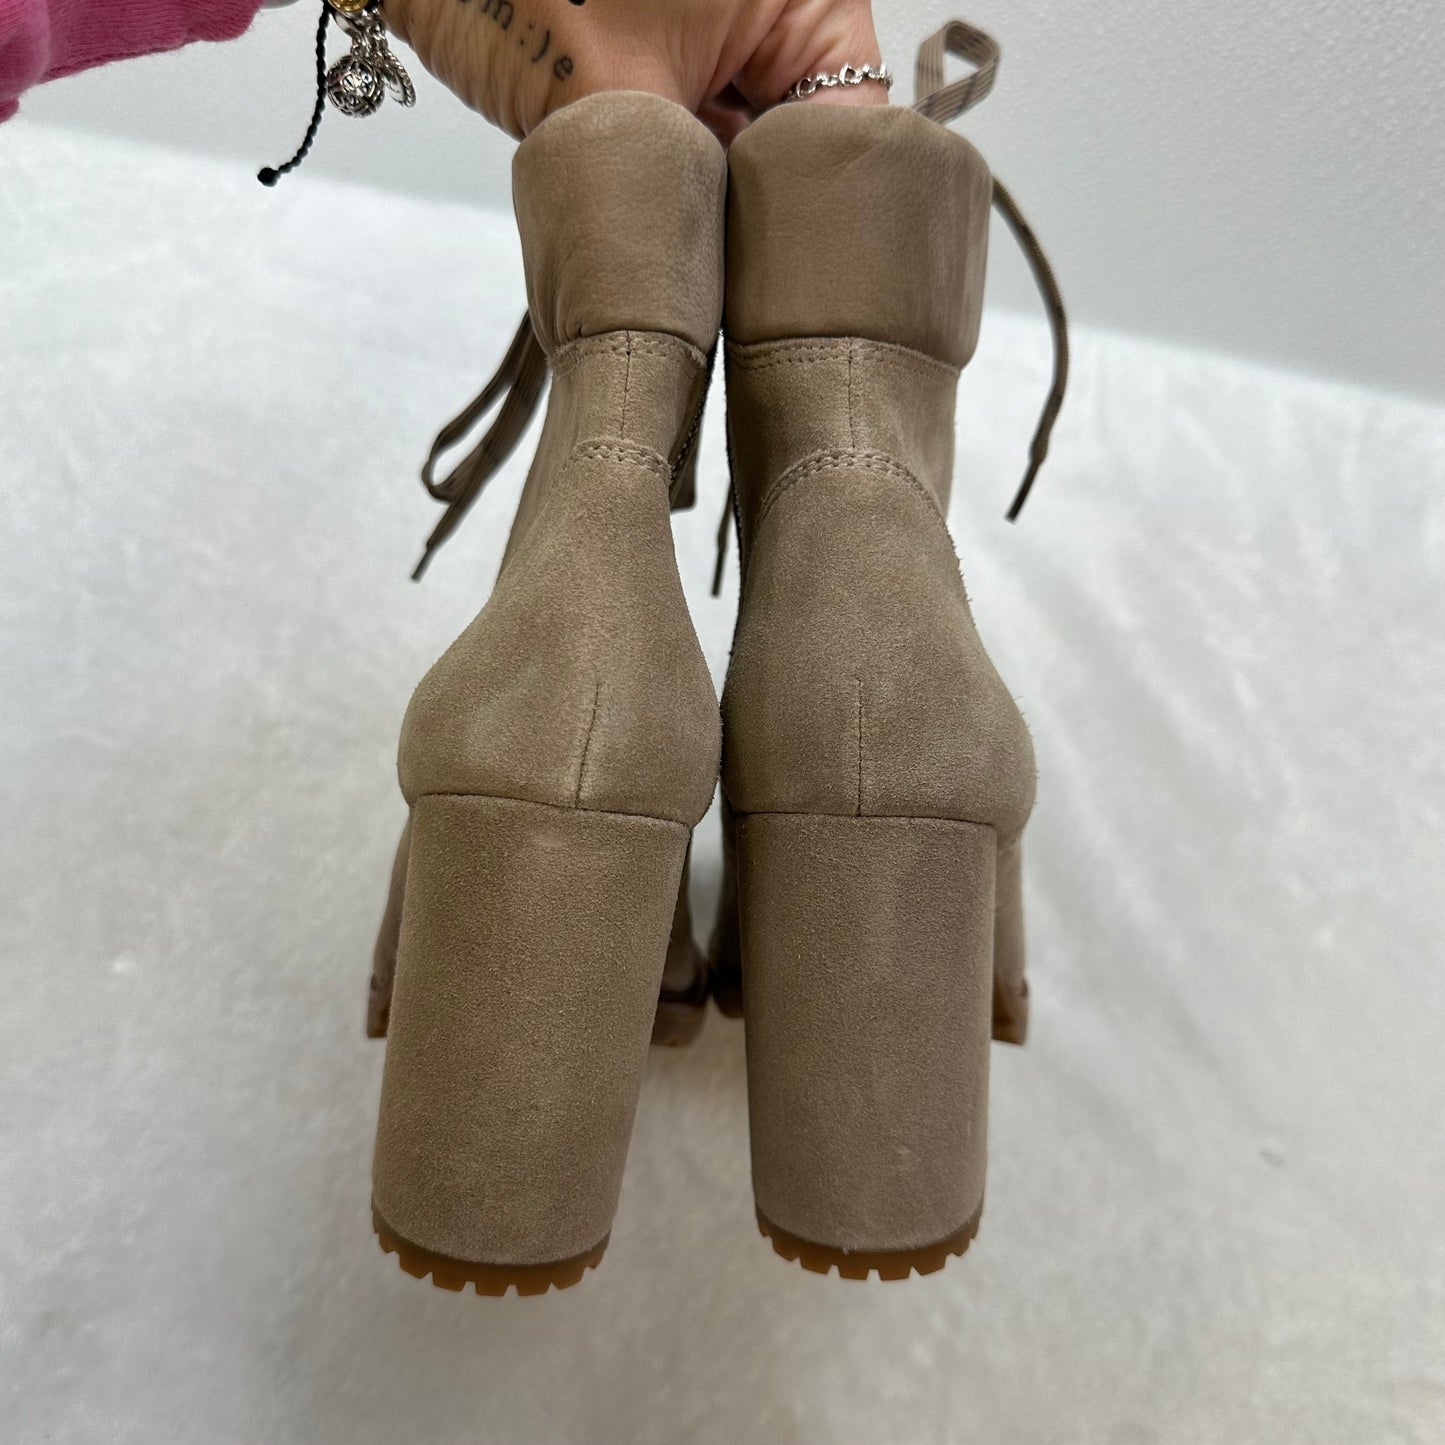 Boots Ankle Flats By Gianni Bini  Size: 6